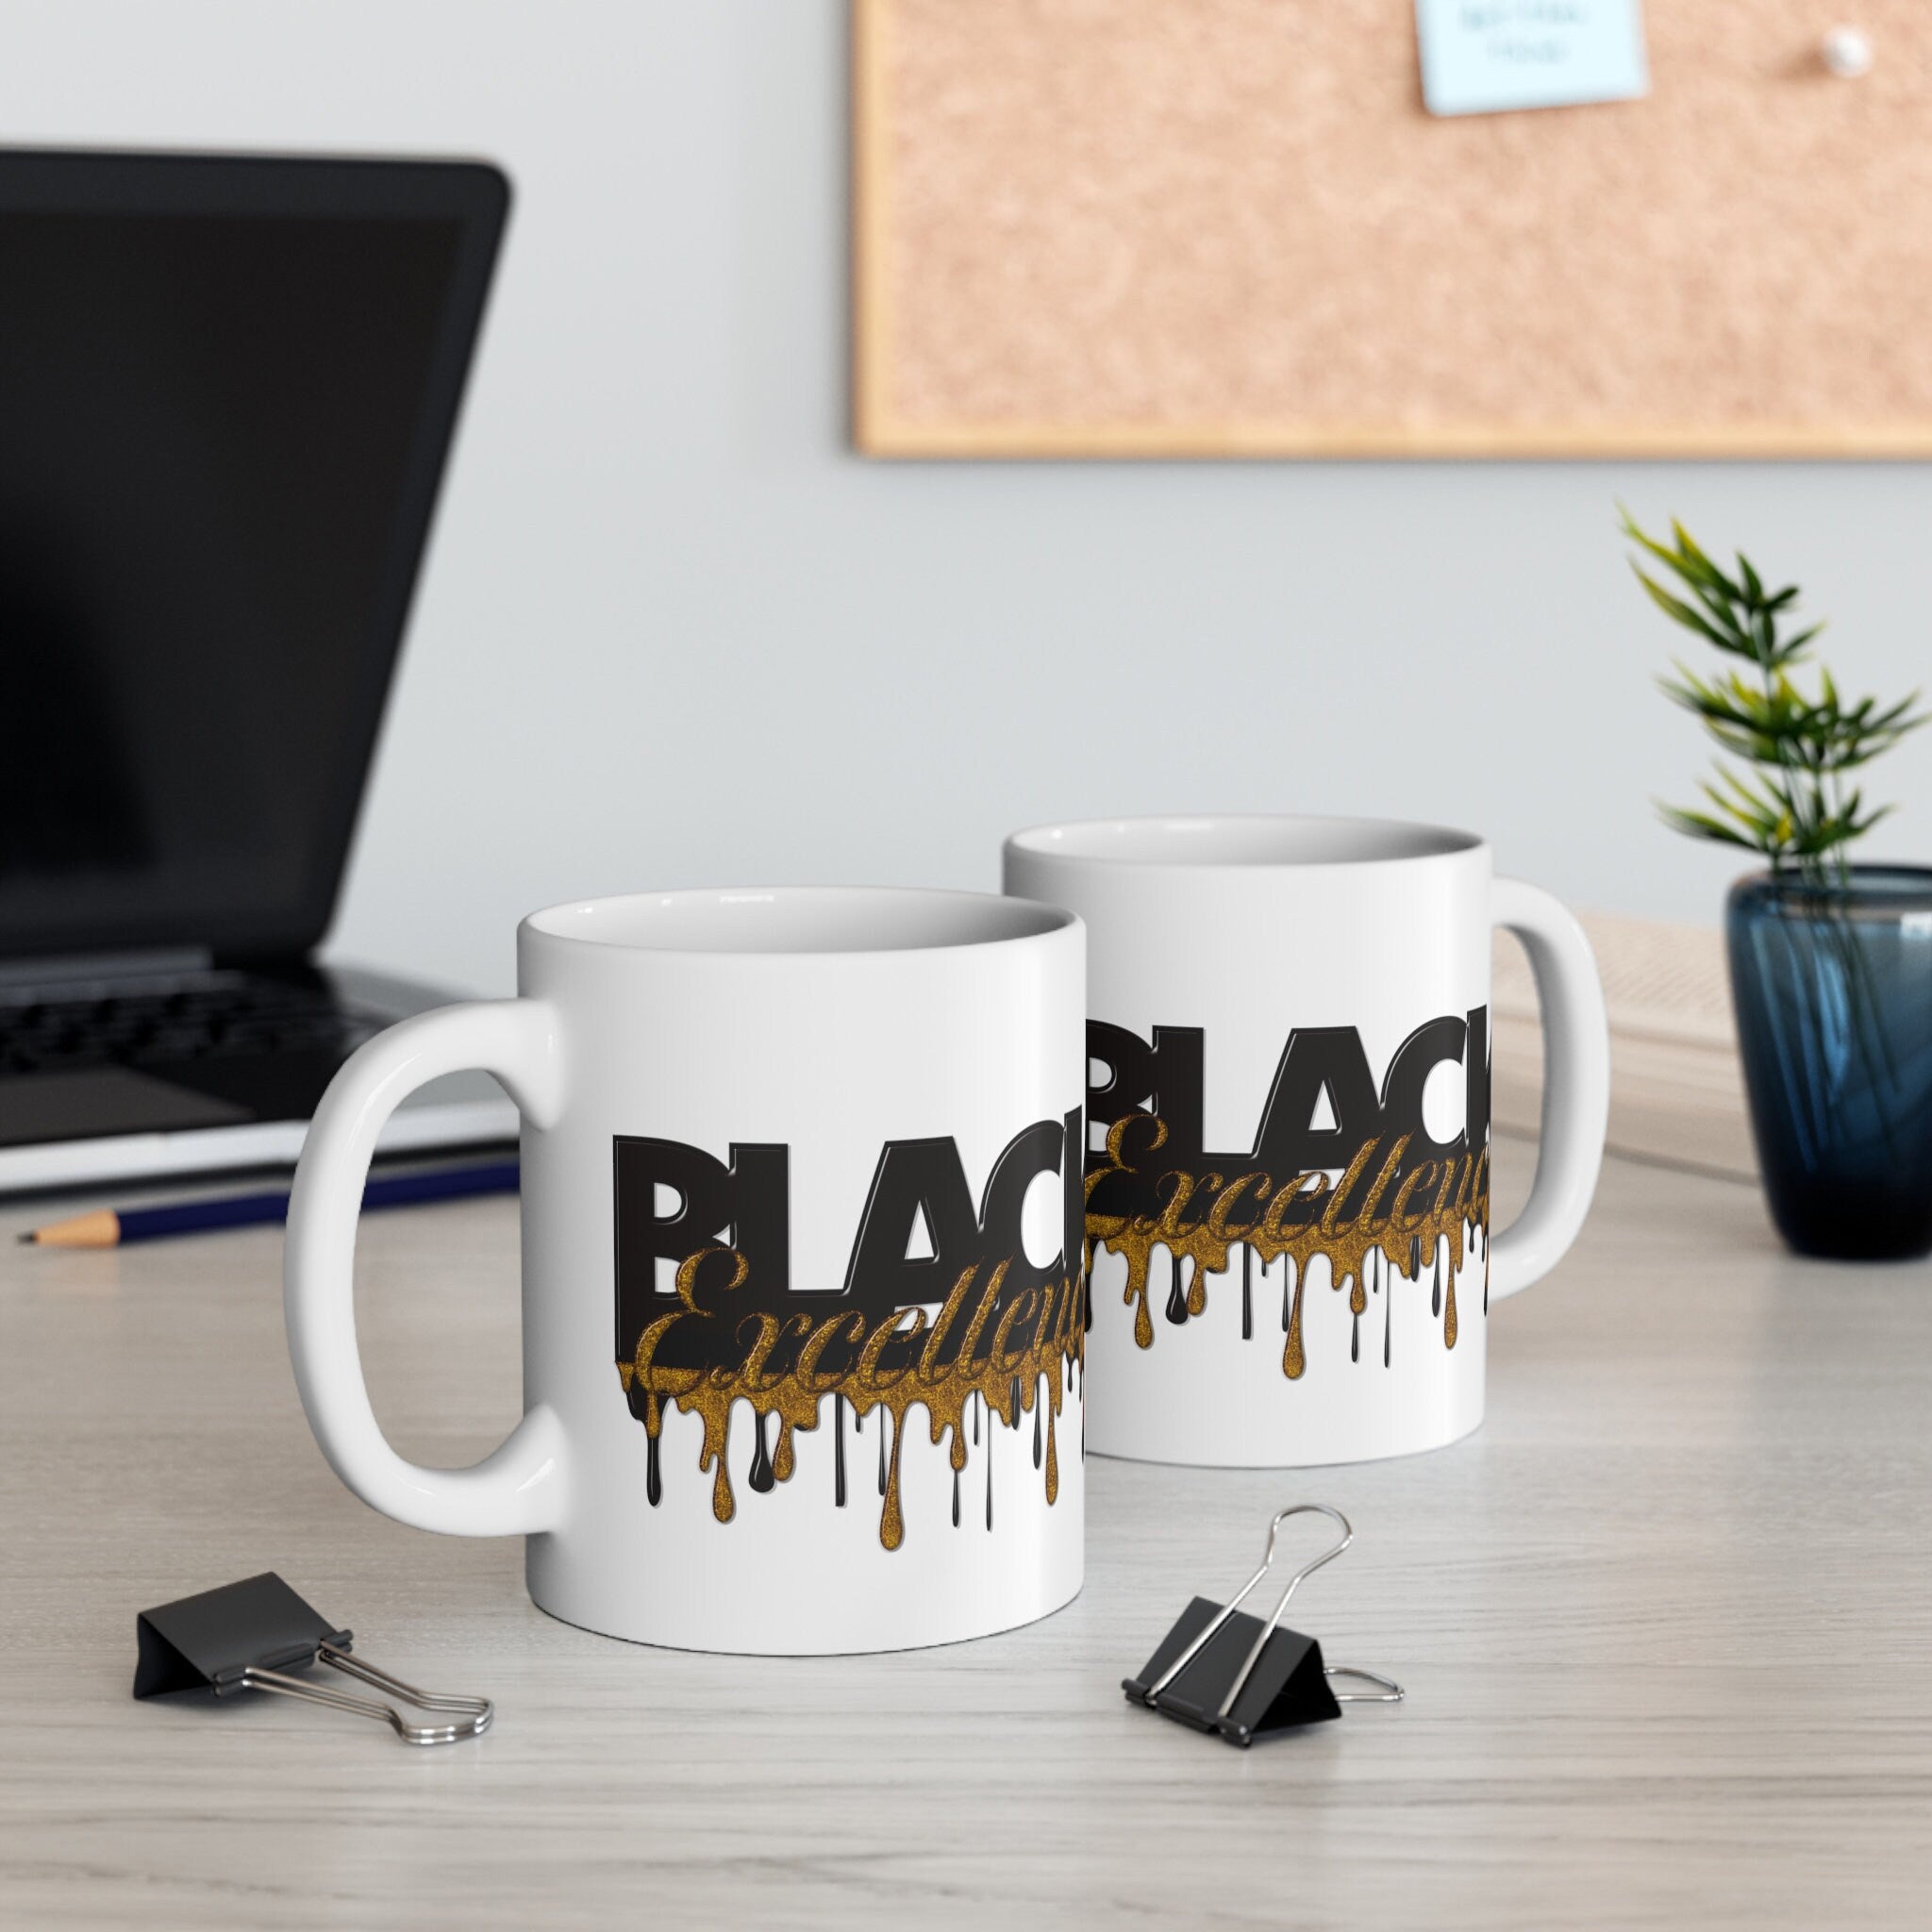 Left and right views of Black Excellence Coffee Mug.